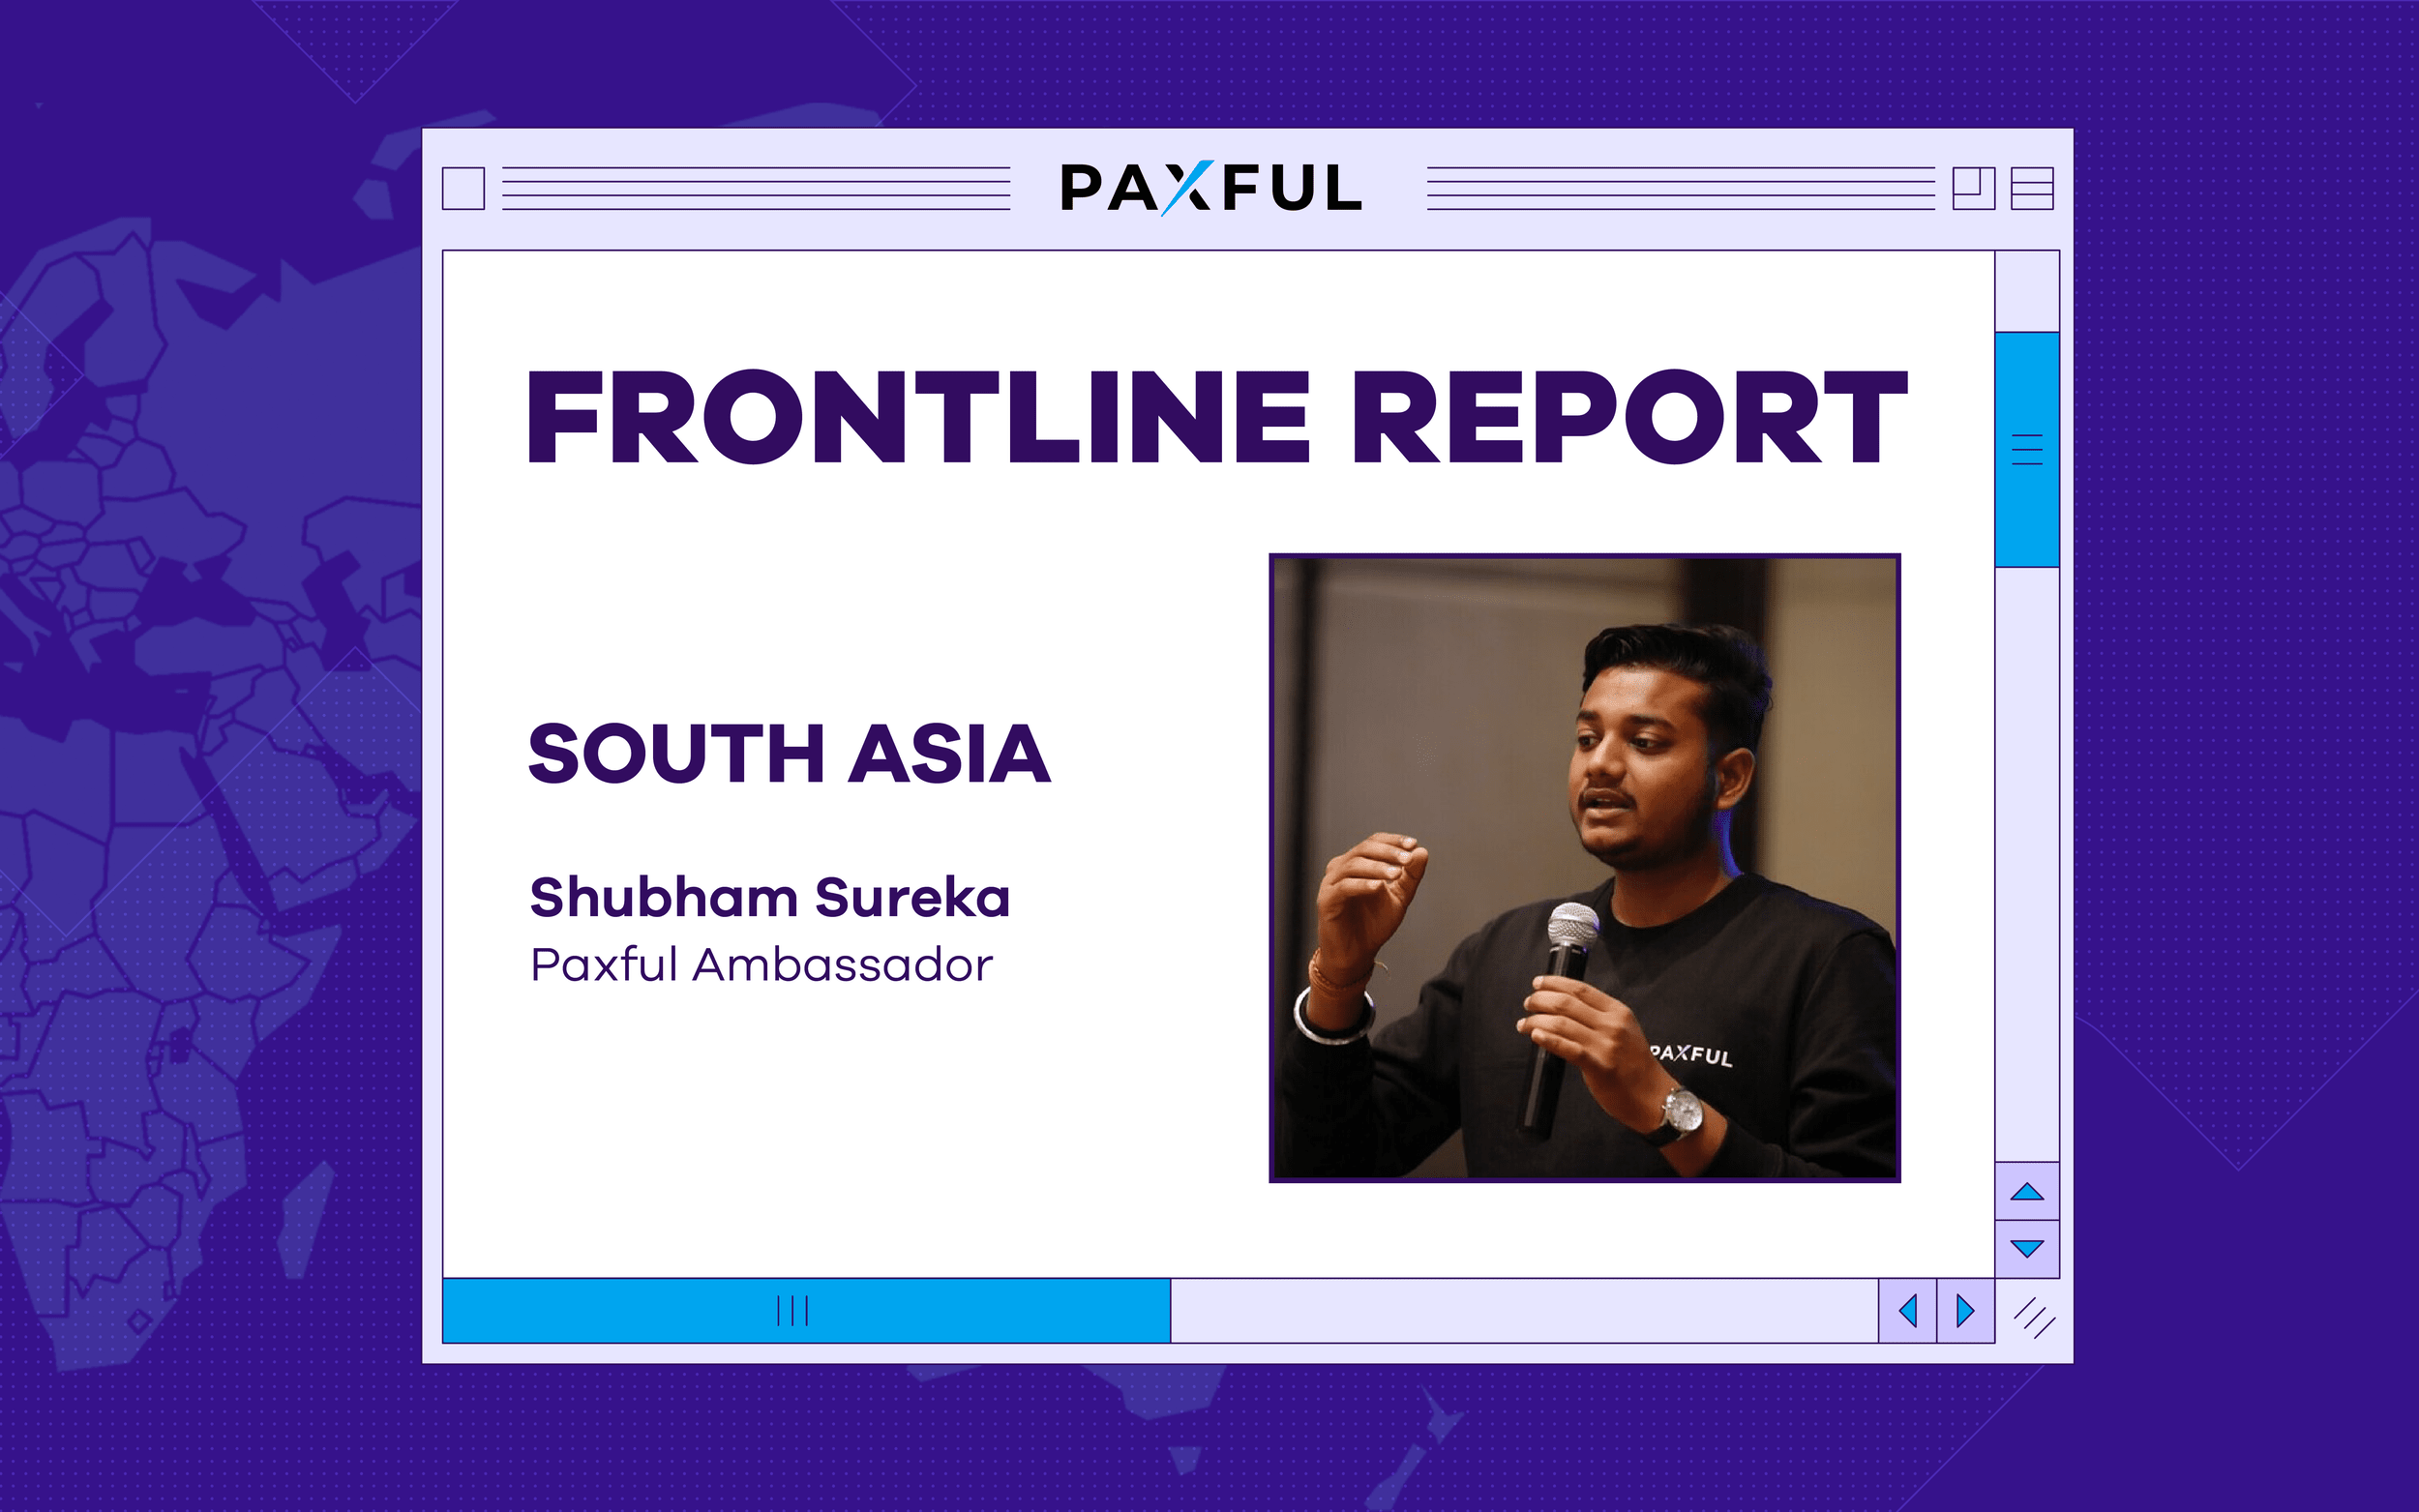 South Asia Frontline Report